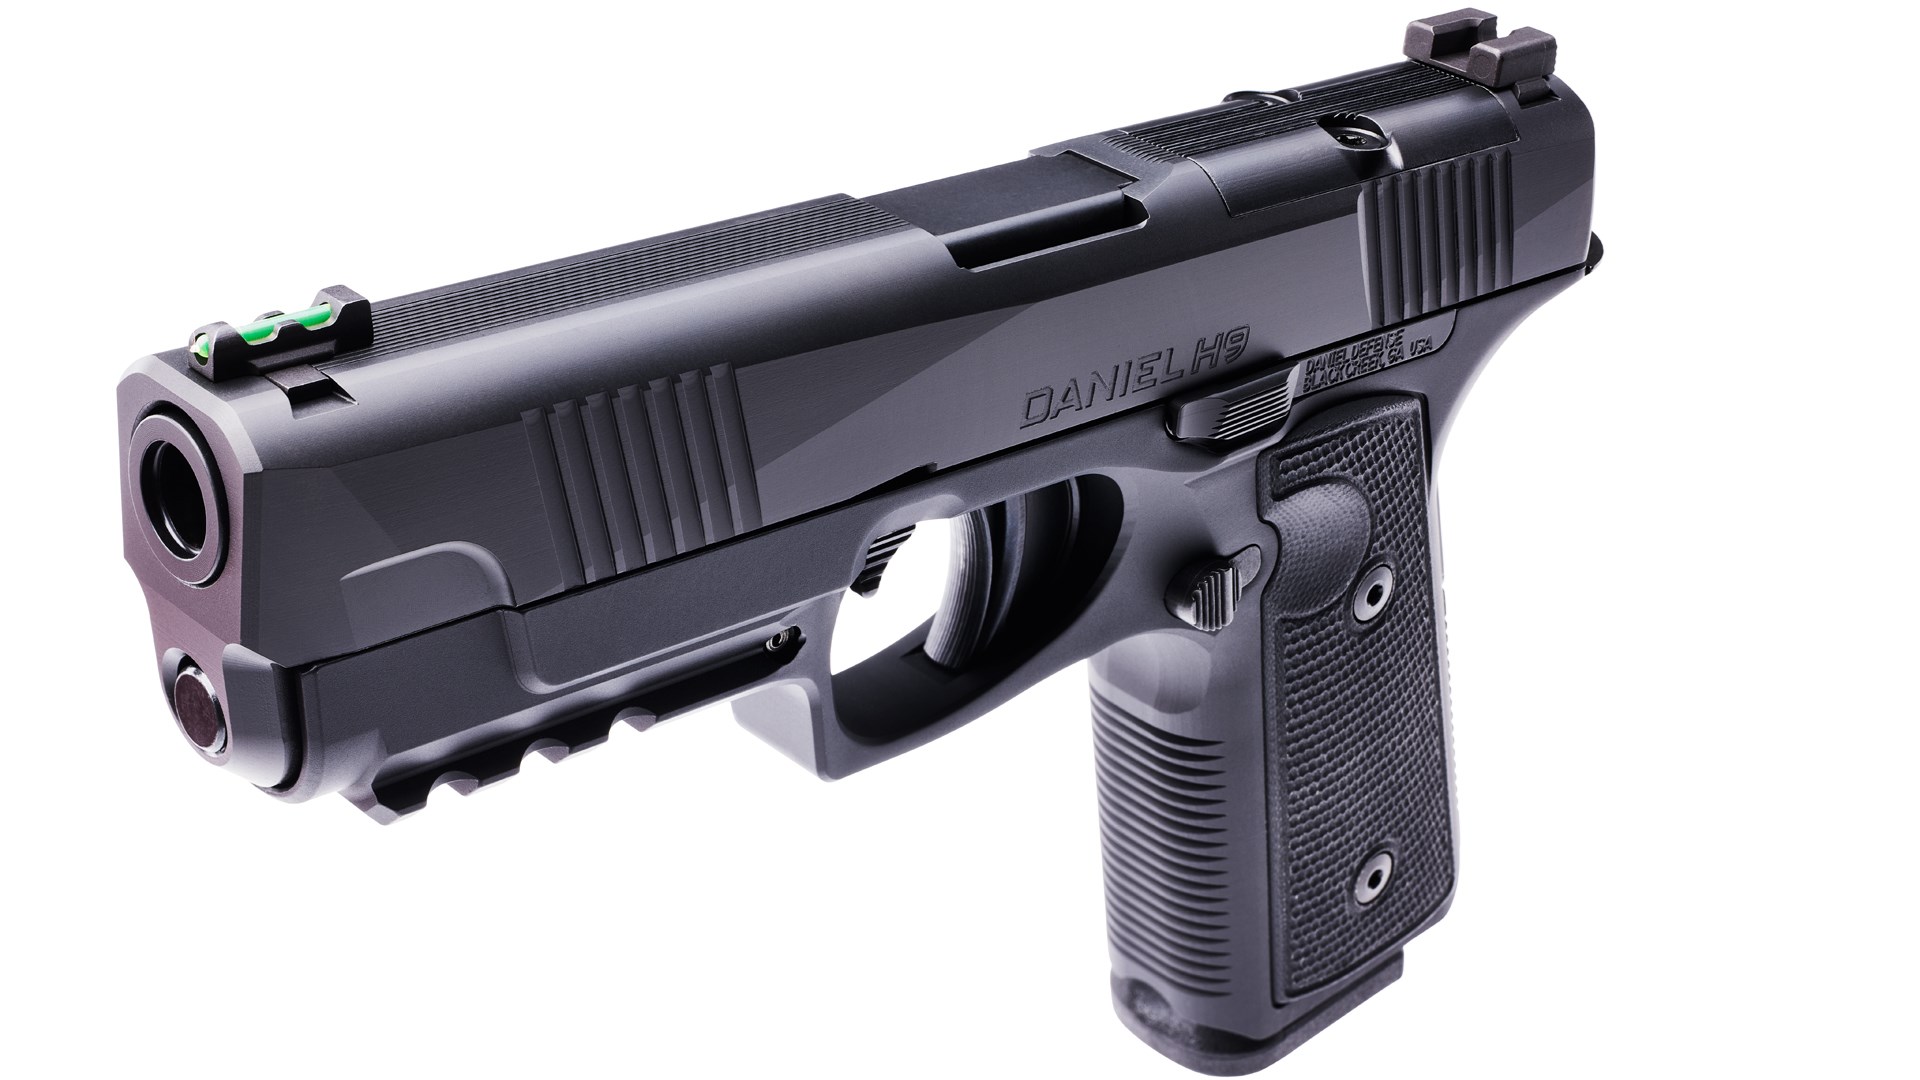 Top and left side of the Daniel Defense H9 pistol, showing fiber-optic front sight and optics cutout.